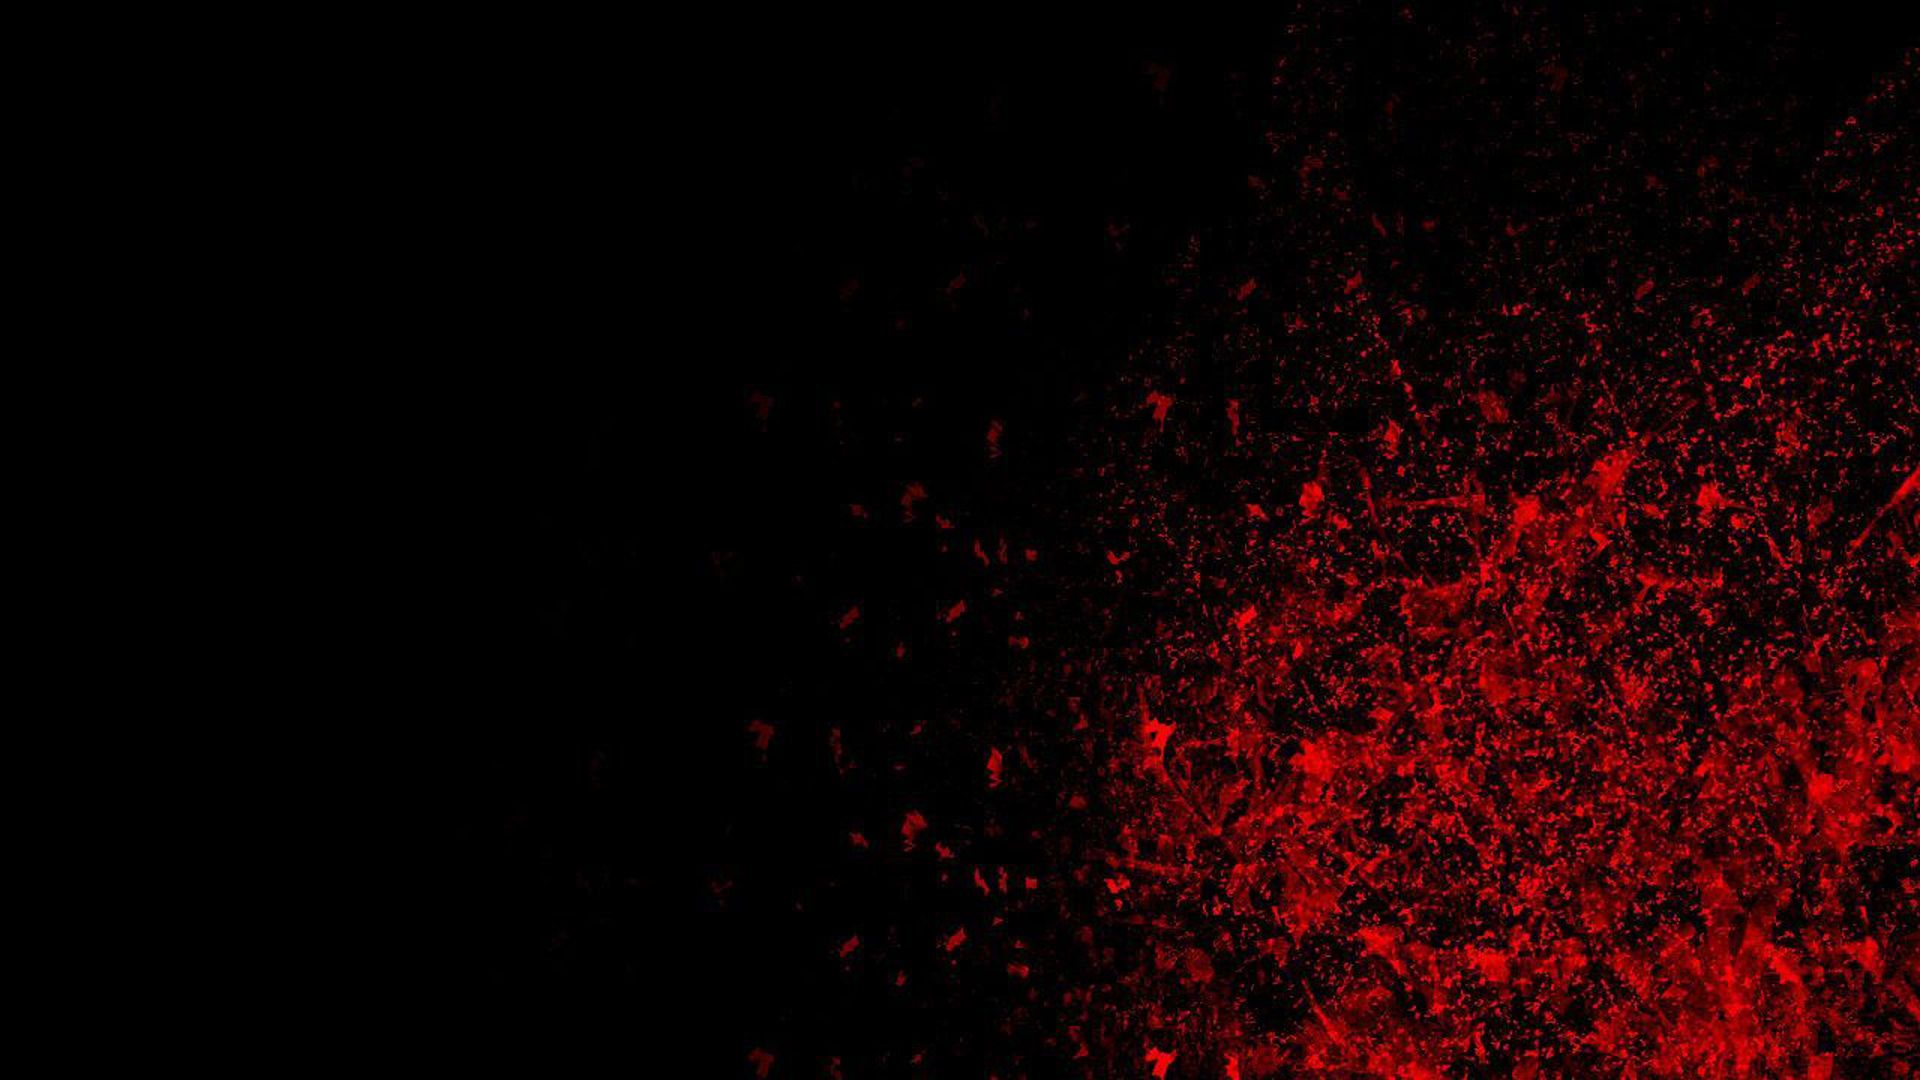 Red Dust on Black Background, HD Abstract, 1080p, Backgrounds, Images, Wallpapers, Photos, Pictures, - Dark red, crimson